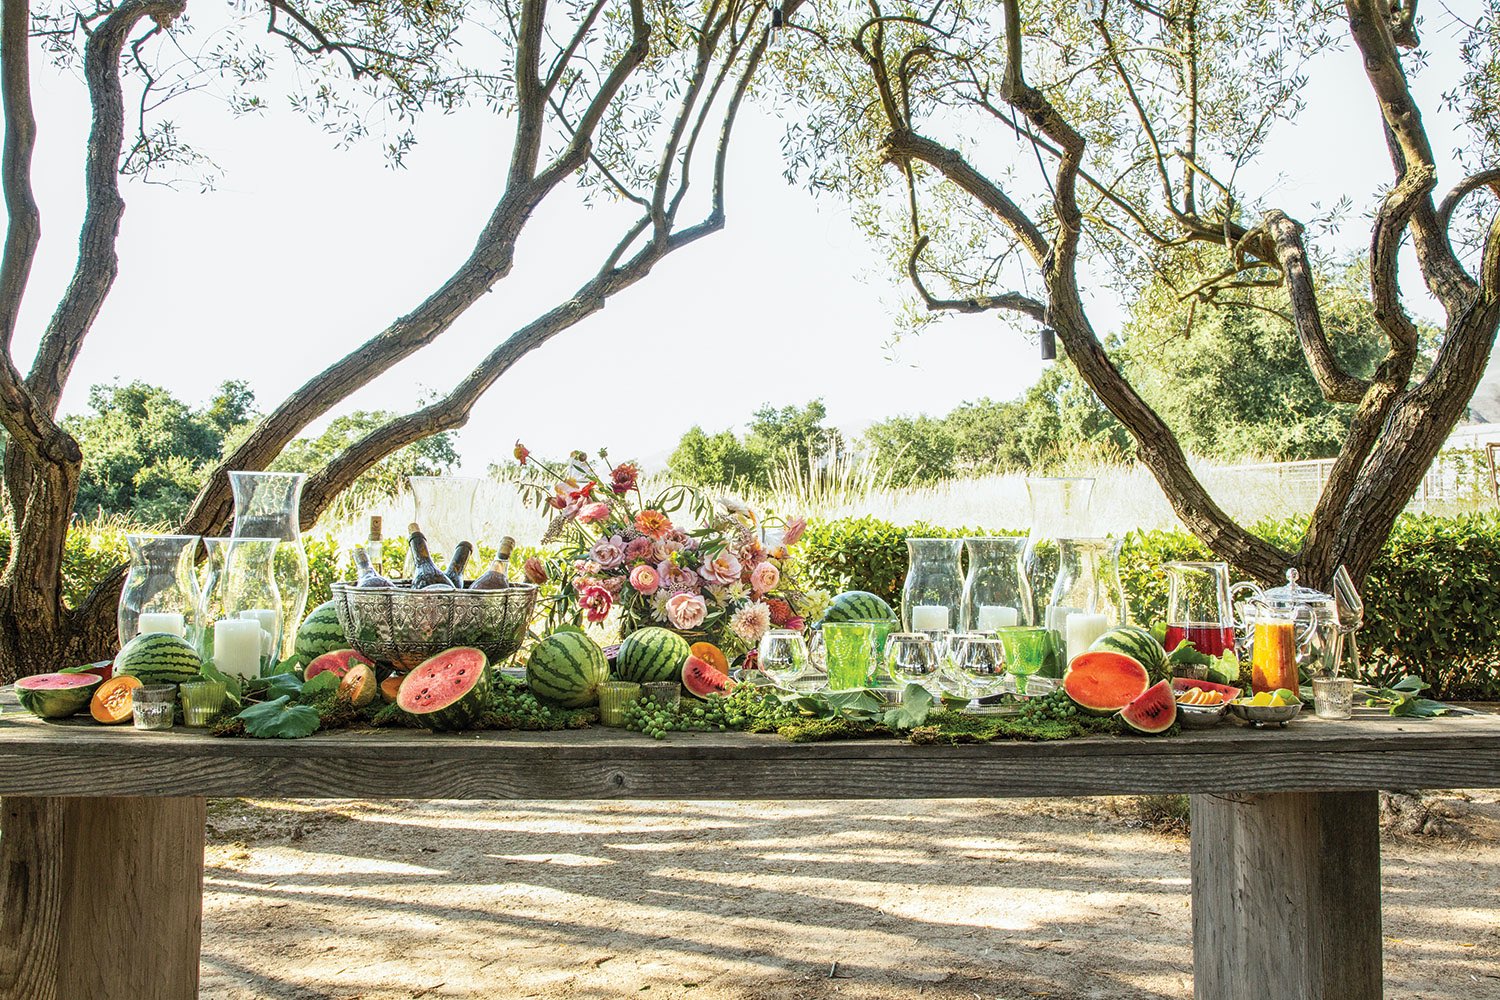 outdoor bar set with flowers, hurricane lamps, watermelons and grapes